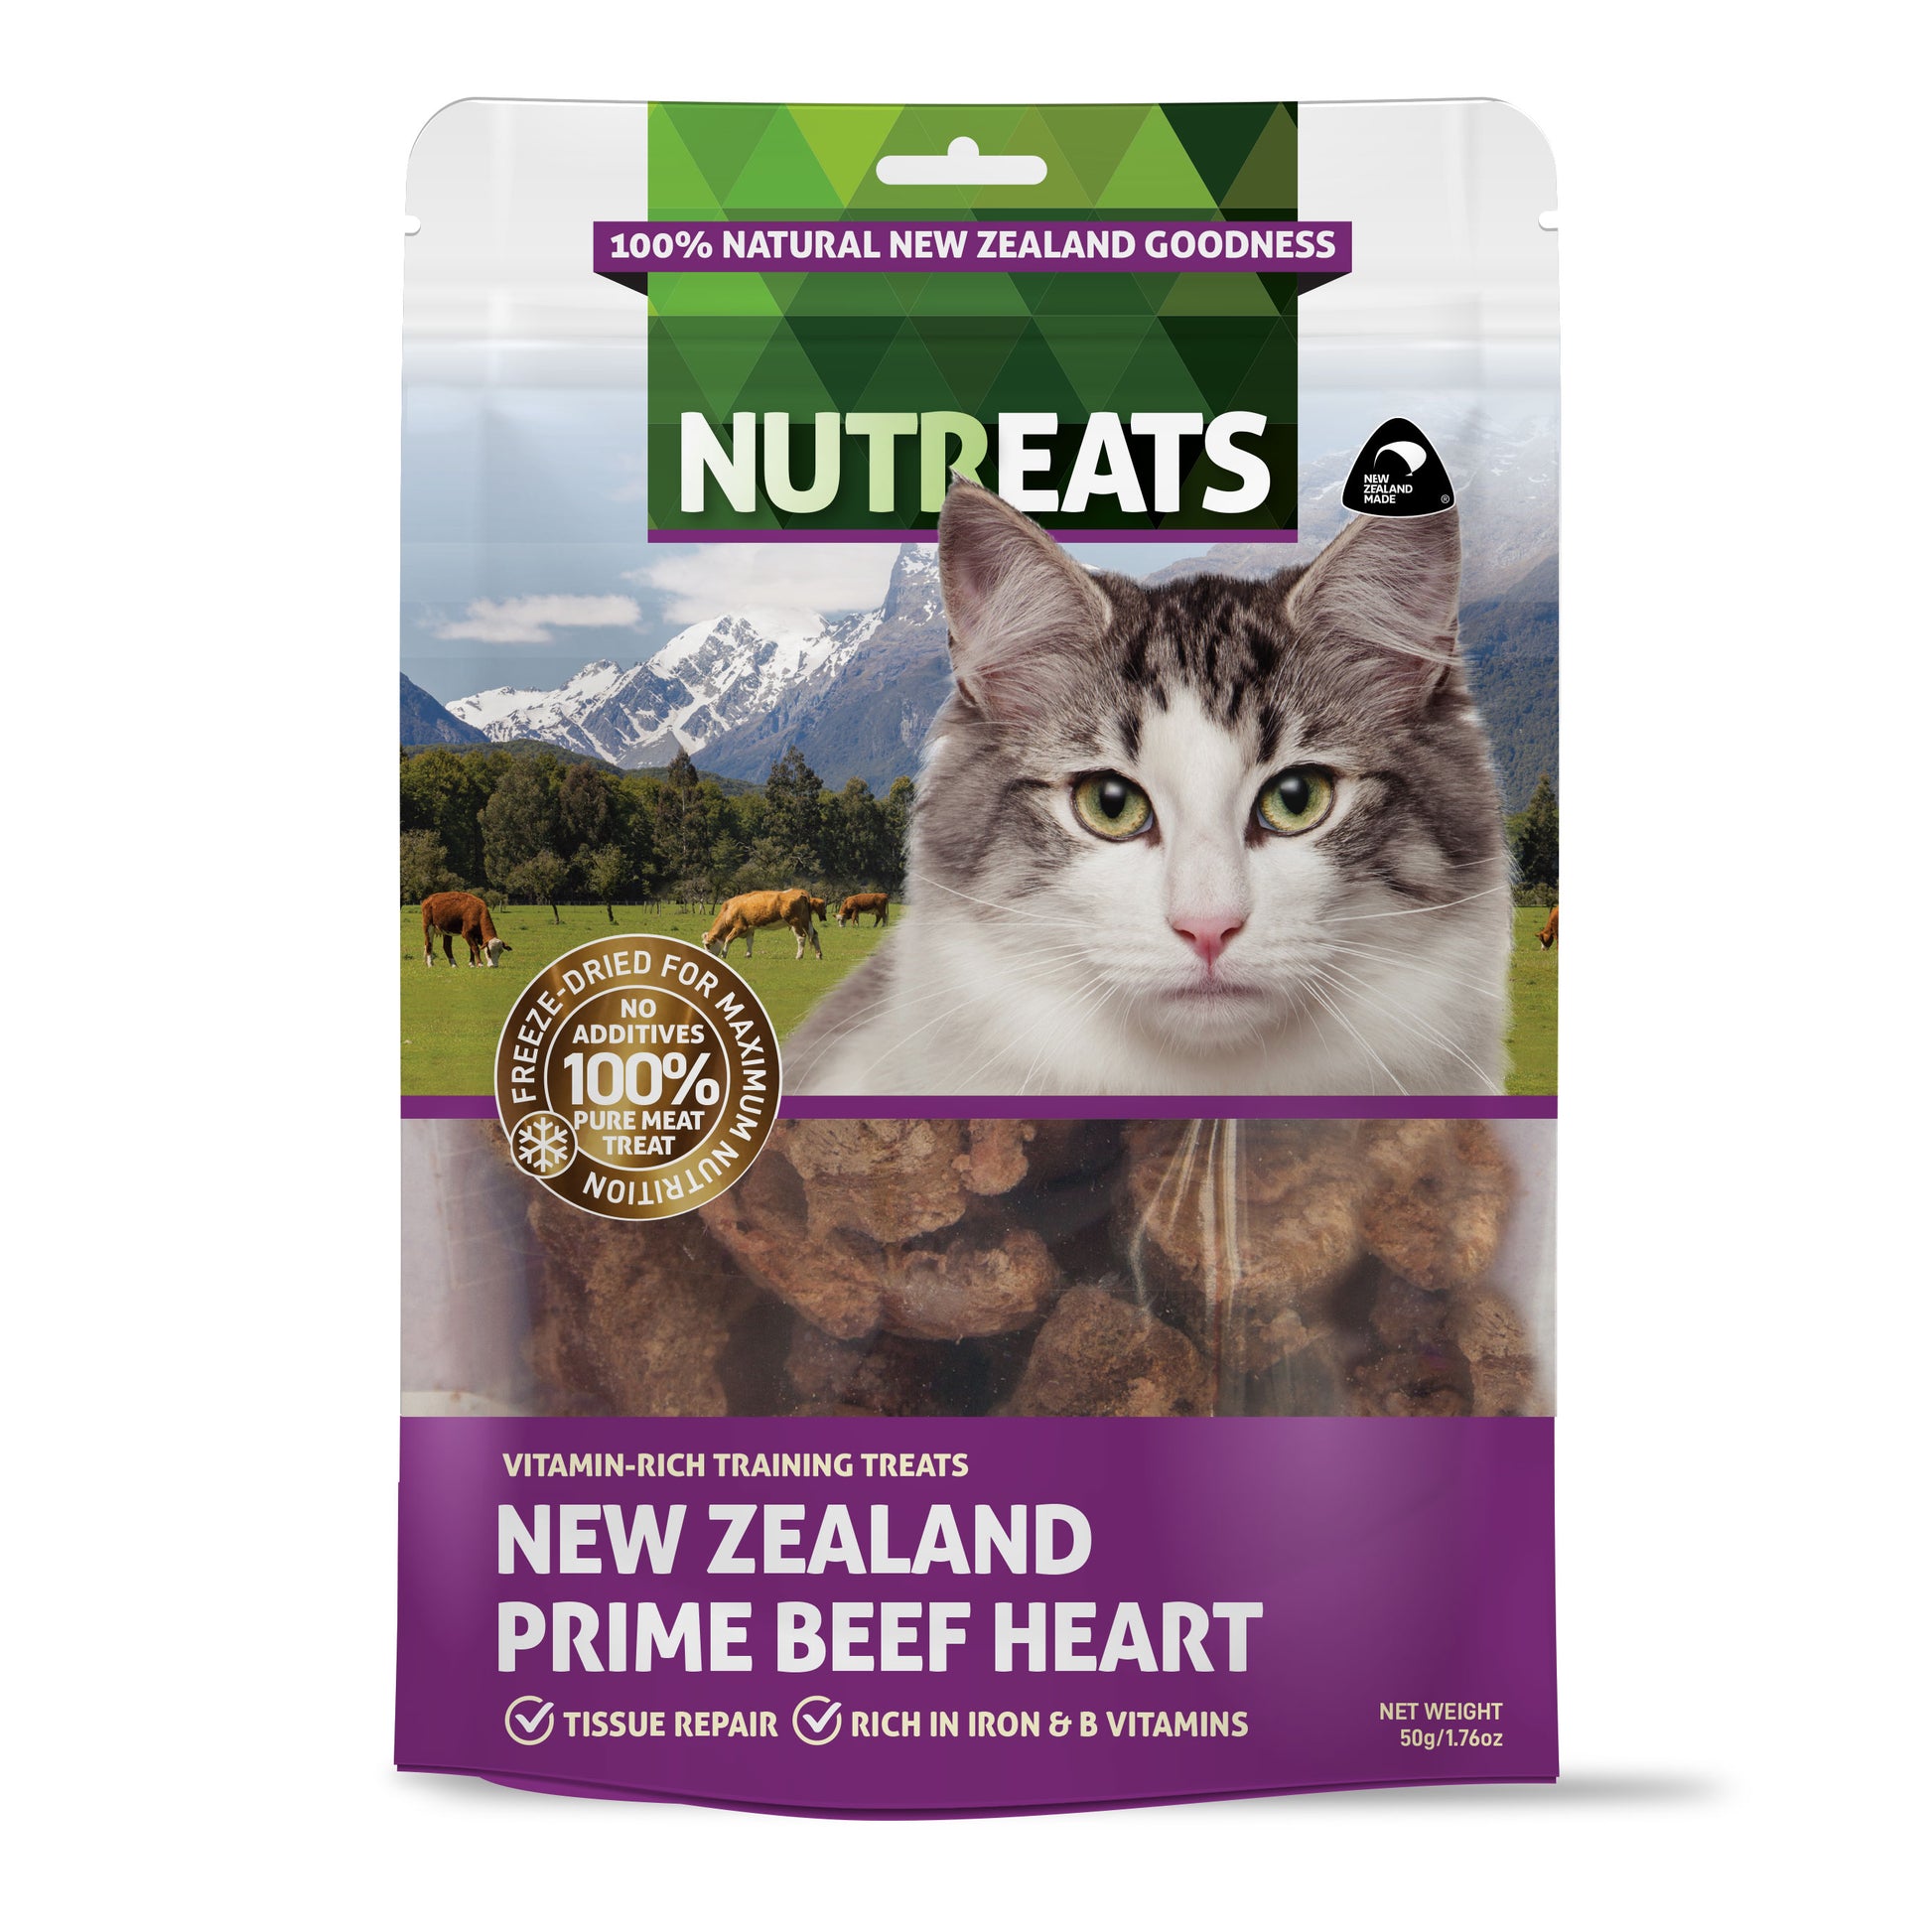 Nutreats New Zealand Prime Beef heart - supporting your cat's tissue repair, and rich in iron and essential vitamins. 100% natural vitamin-rich training treat for cats.